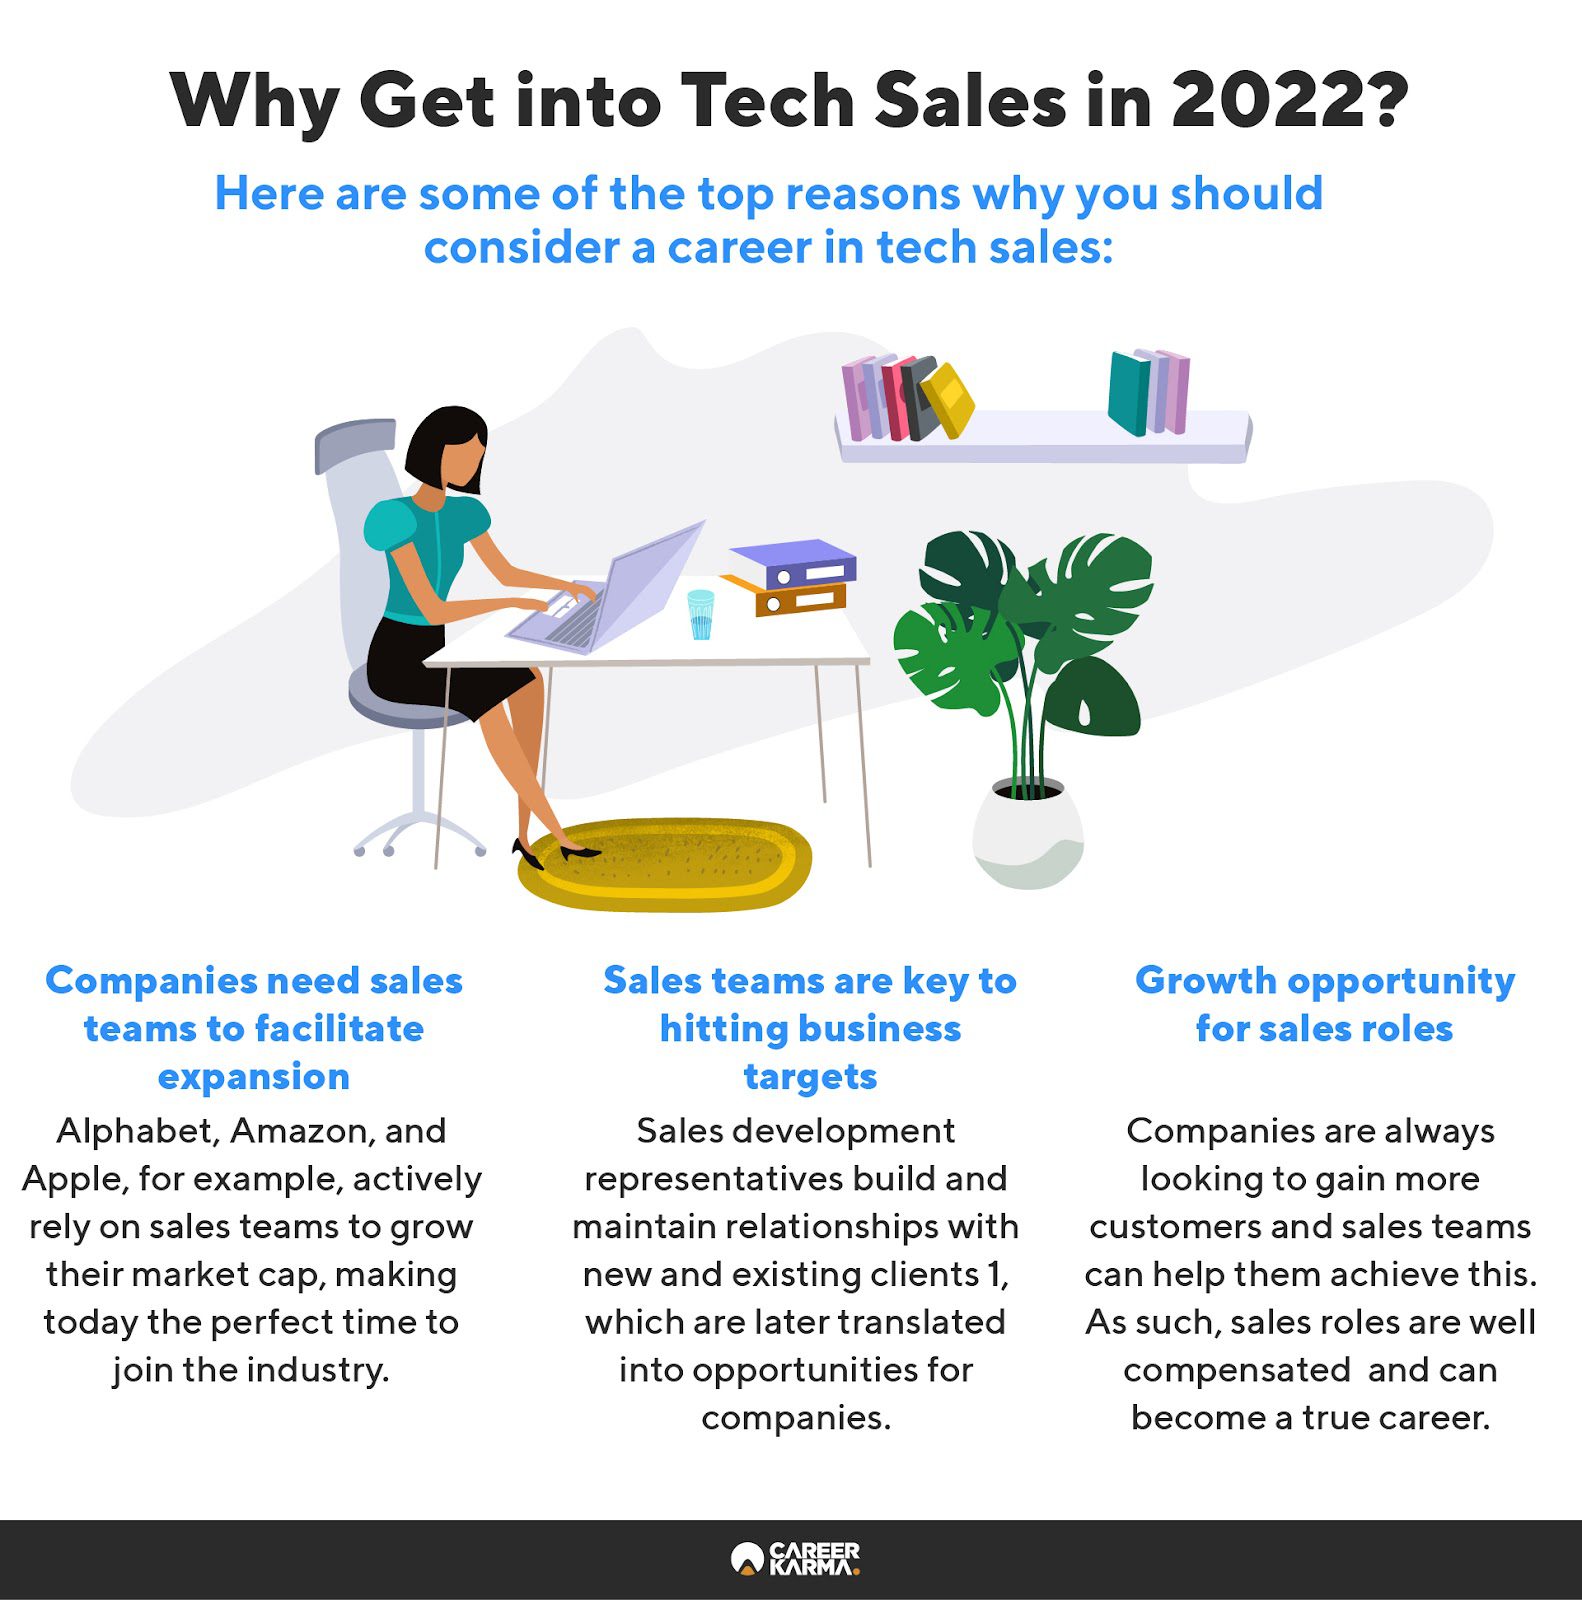 An infographic highlighting the benefits of starting a tech sales career